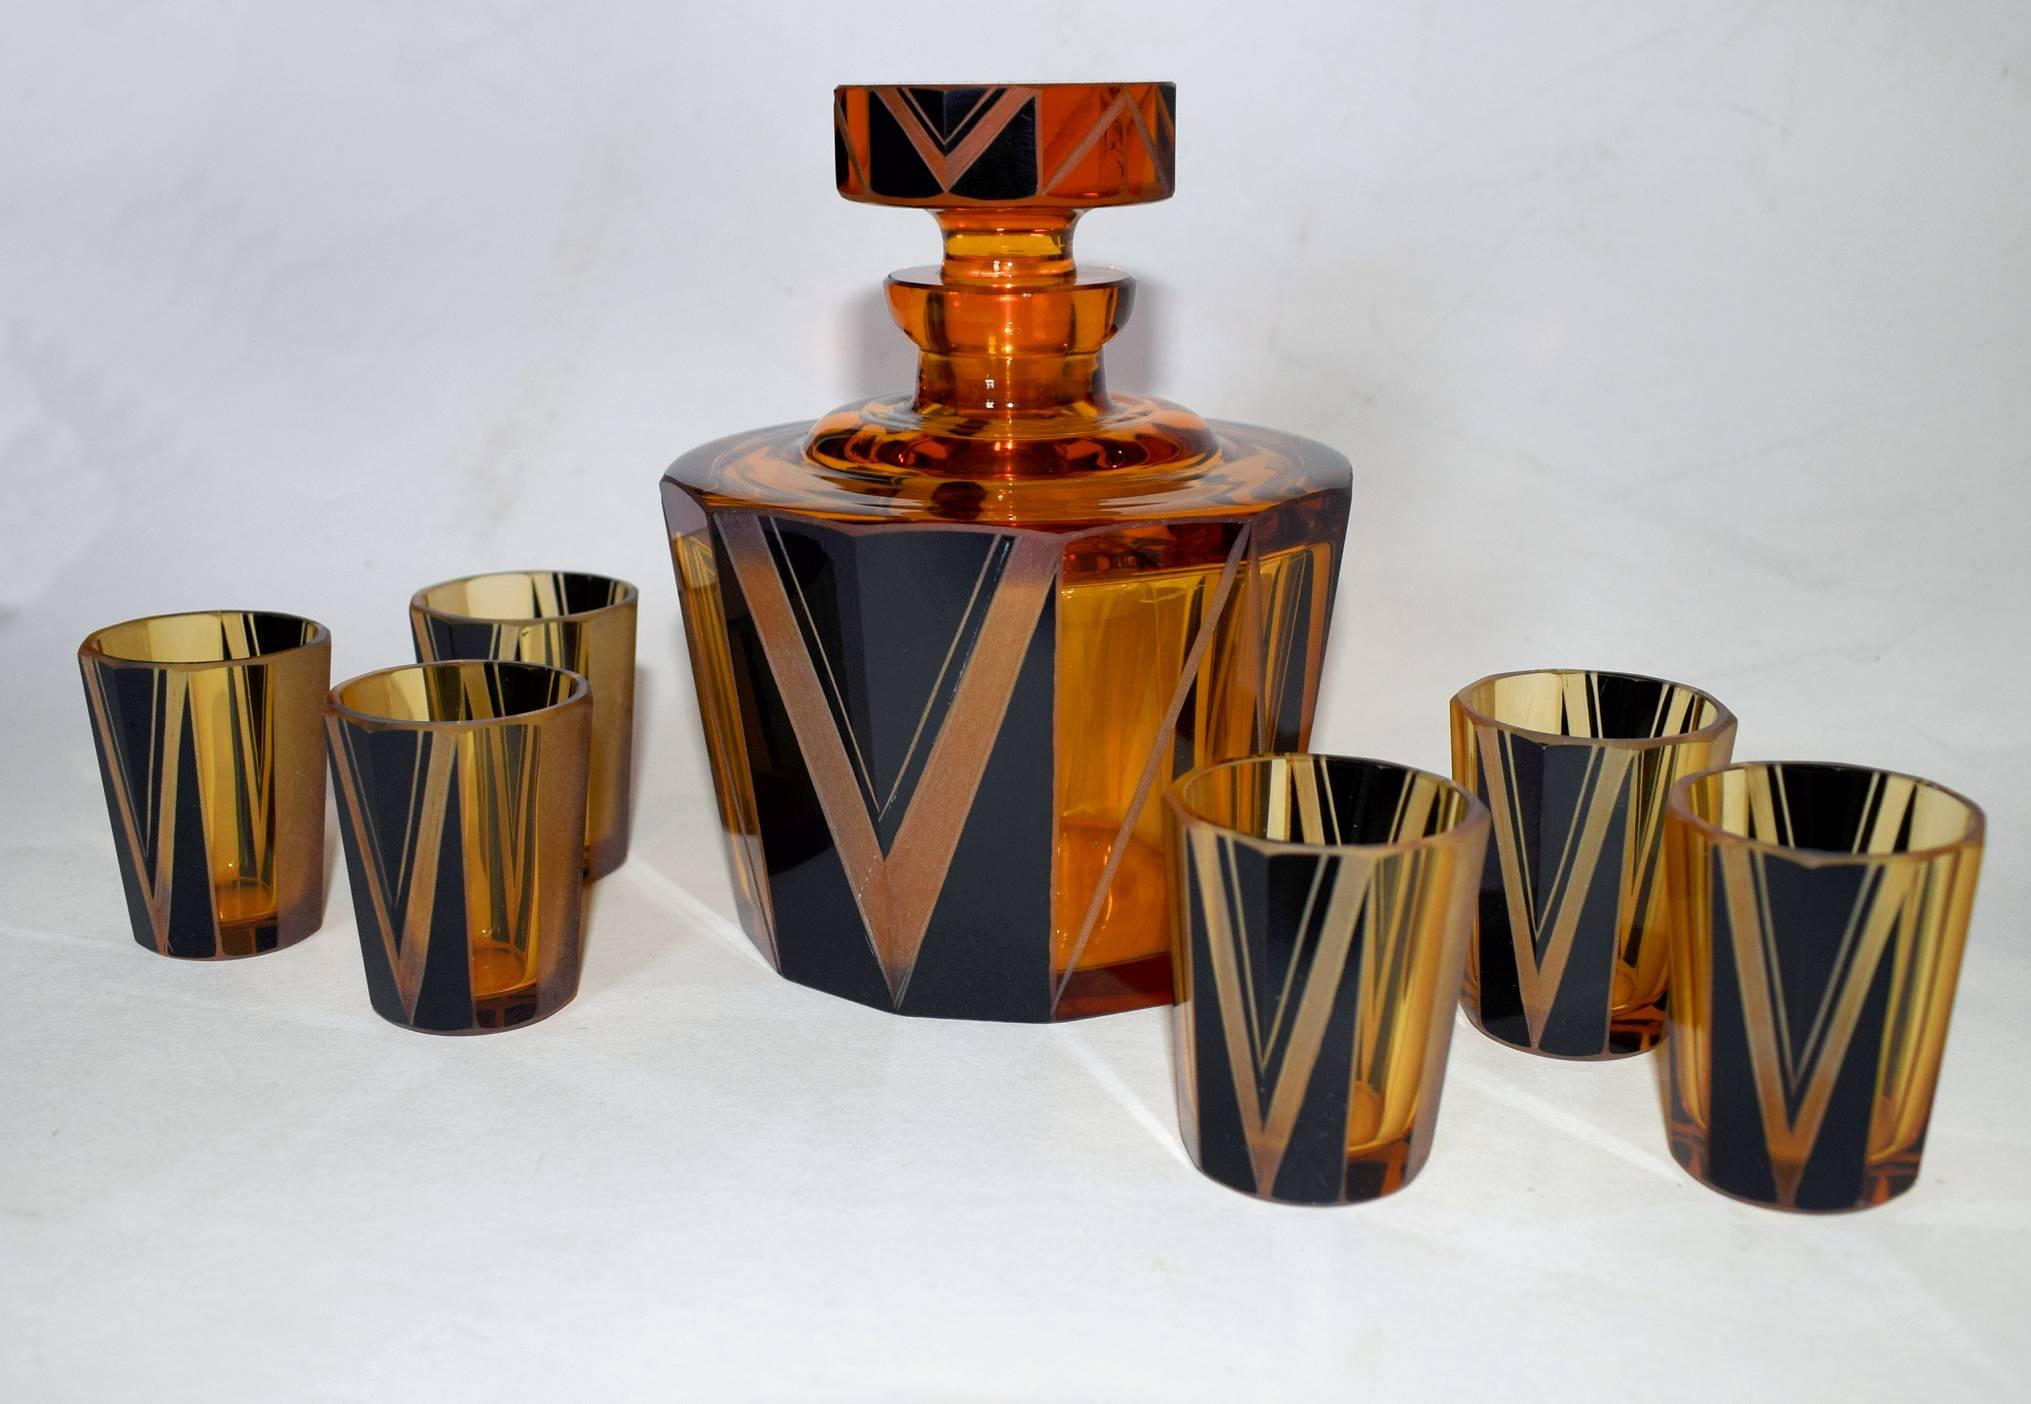 Wonderfully stylish 1930s Art Deco glass decanter set in a warm amber color with black geometric enamel decoration. Originates from the Czech Republic. This wonderful set is deceptively heavy and shows signs of real quality. The whole set is in